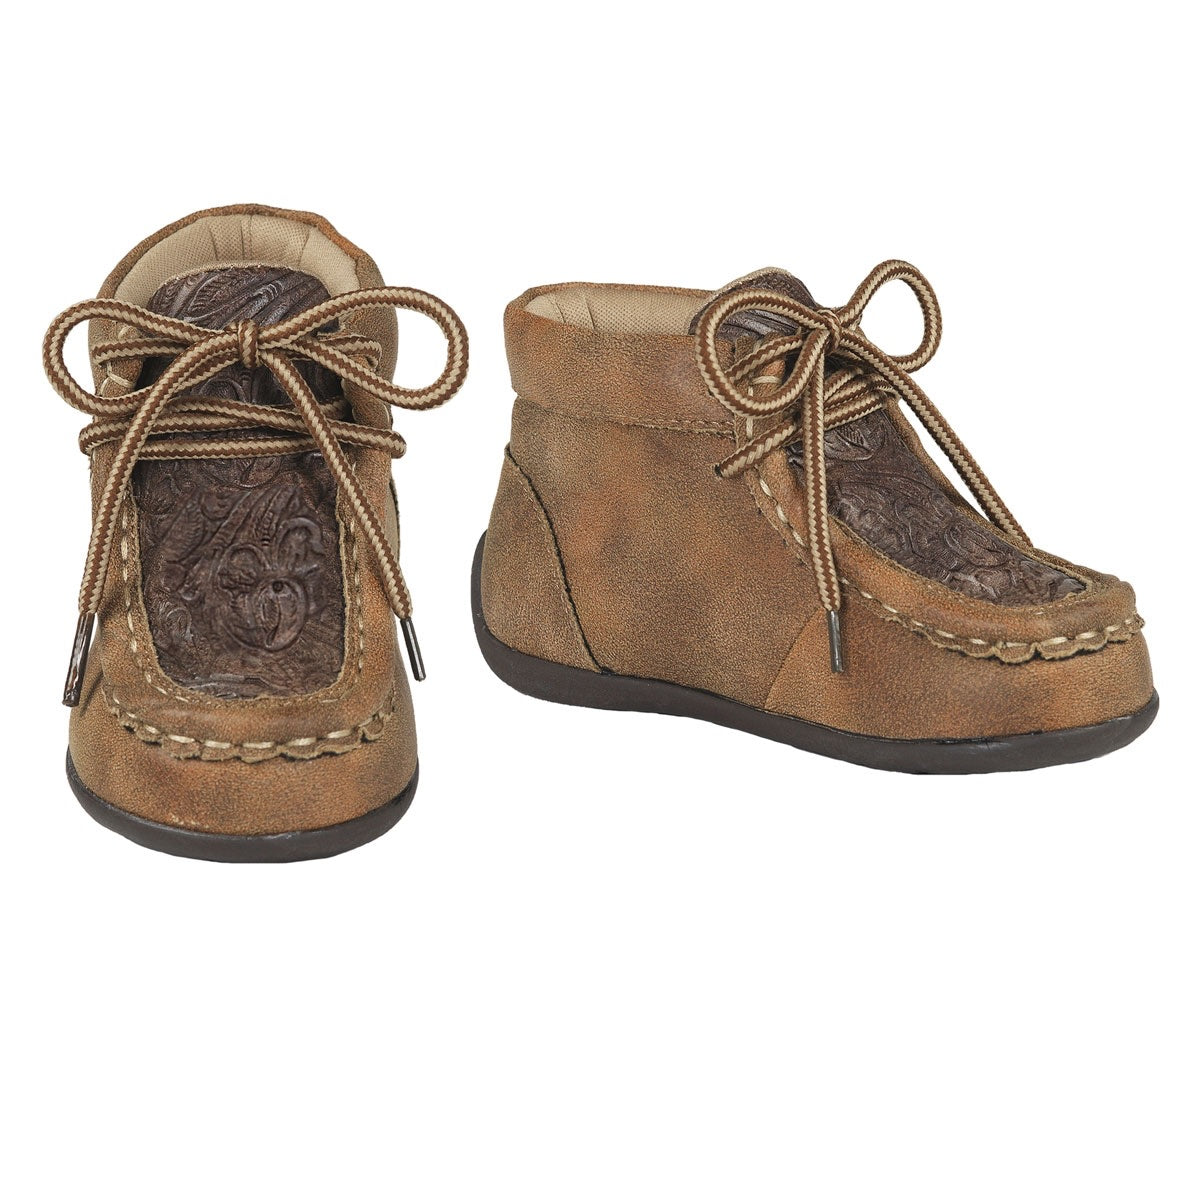 M&F Twister Jed Shoes (1908)